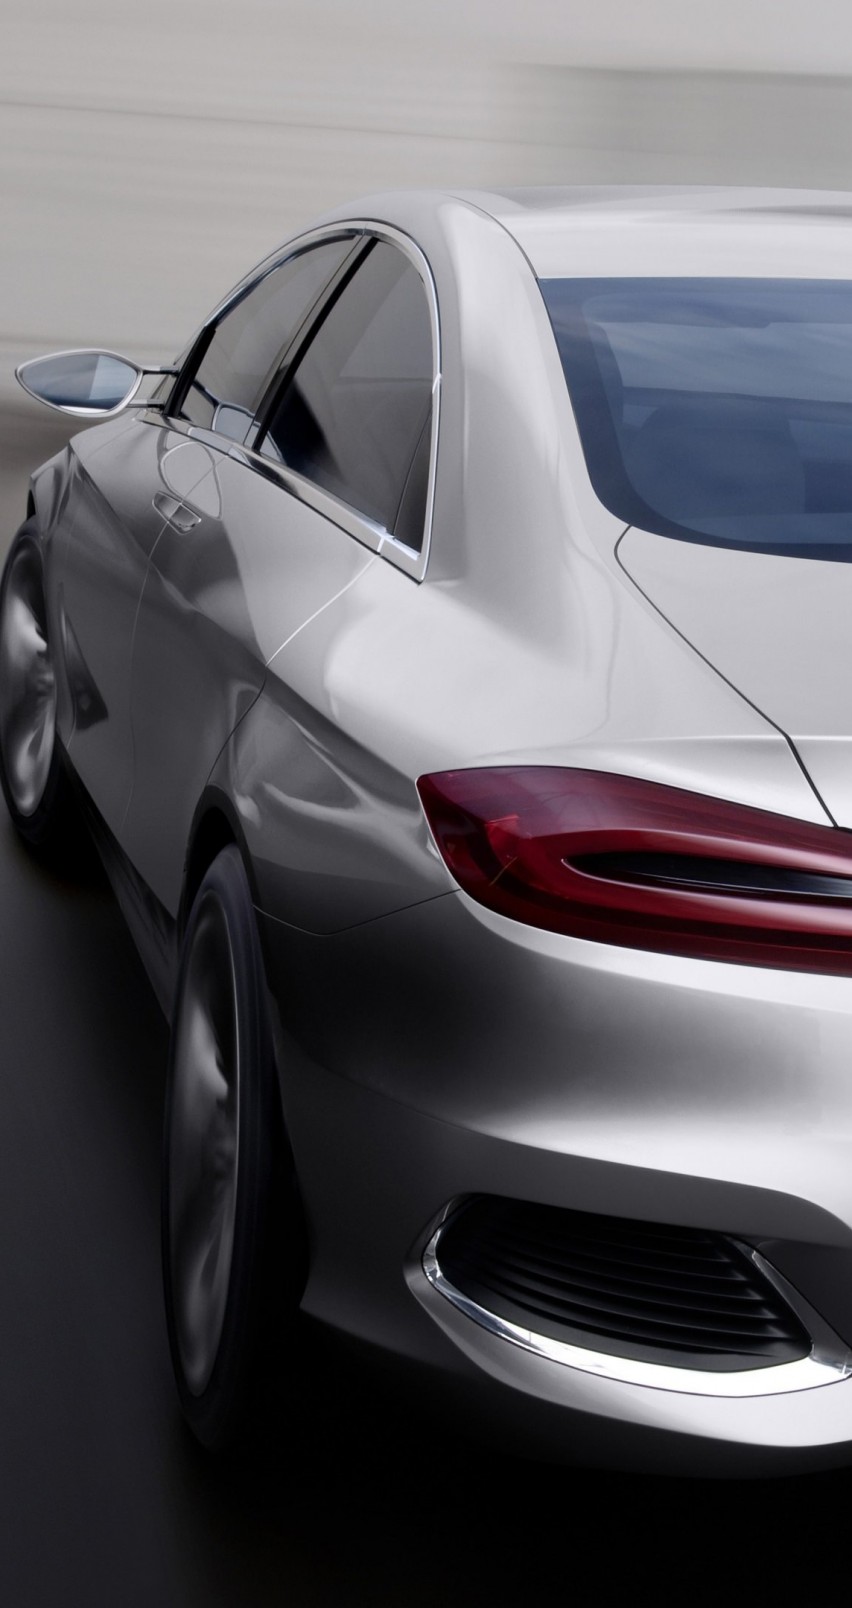 Mercedes Benz F800 Concept Rear View Wallpaper for Apple iPhone 6 / 6s